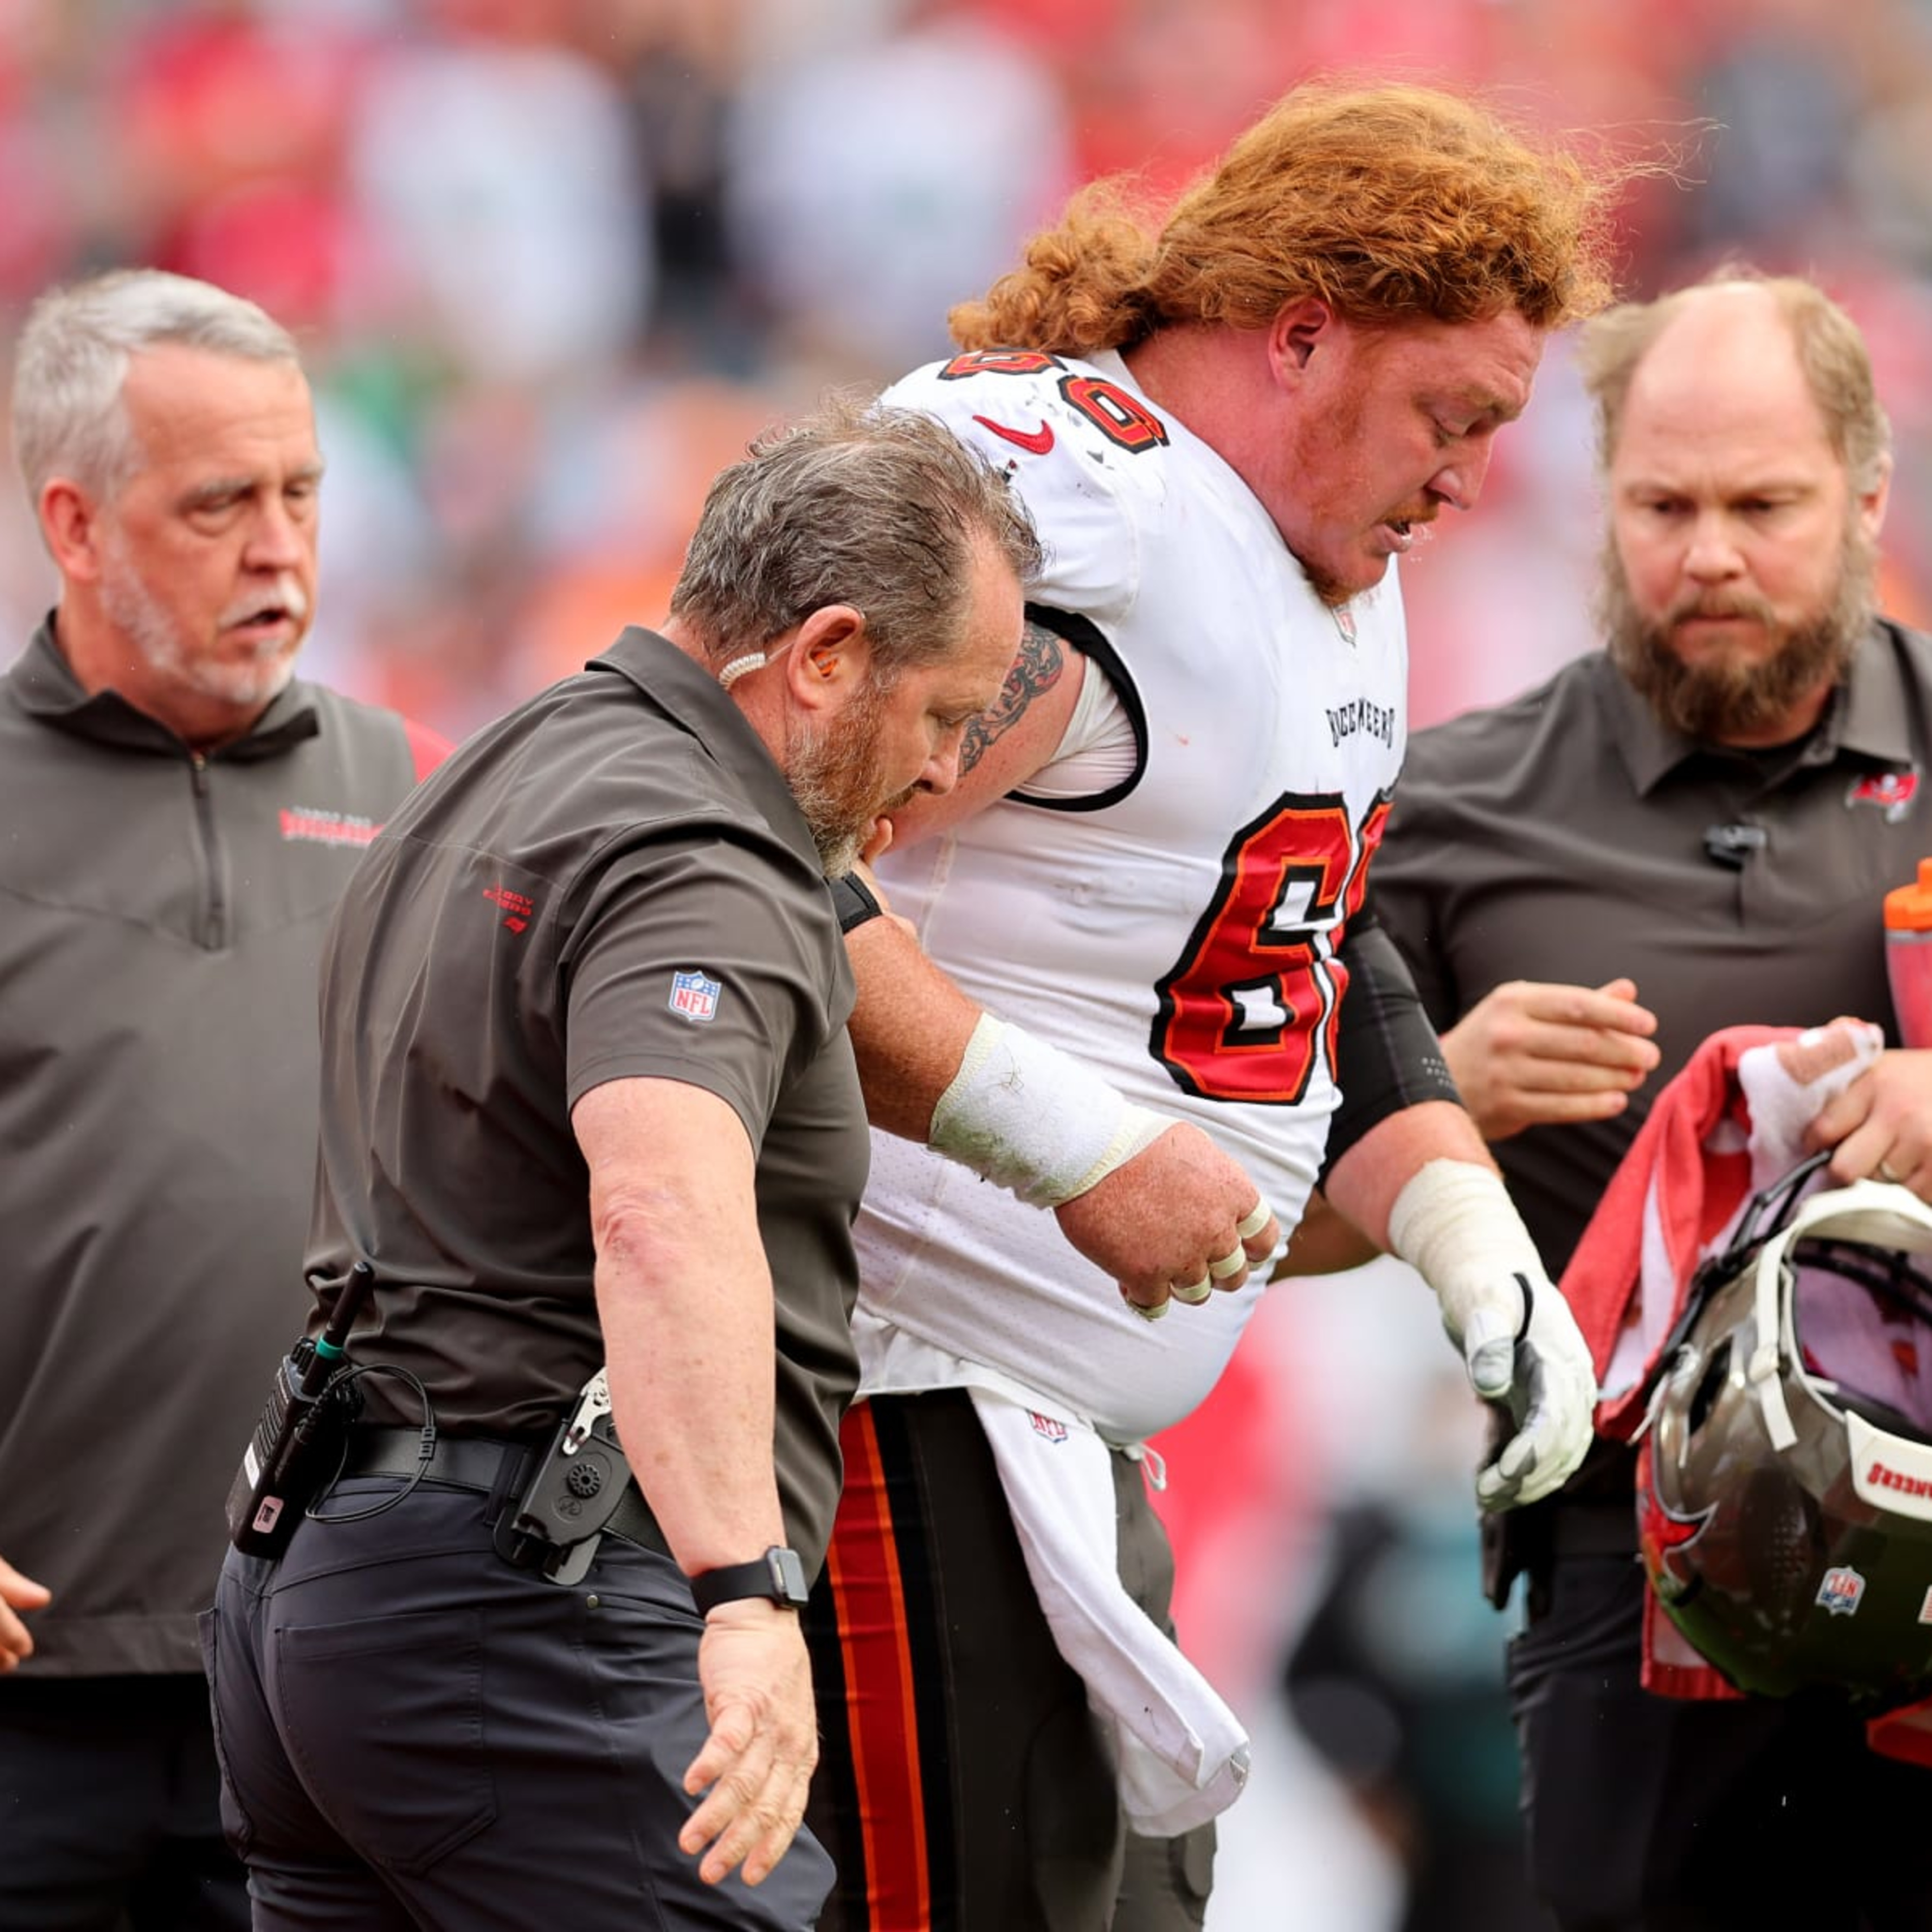 Bucs’ Pro Bowl Center Ryan Jensen Carted Off with Knee Injury at Training Camp